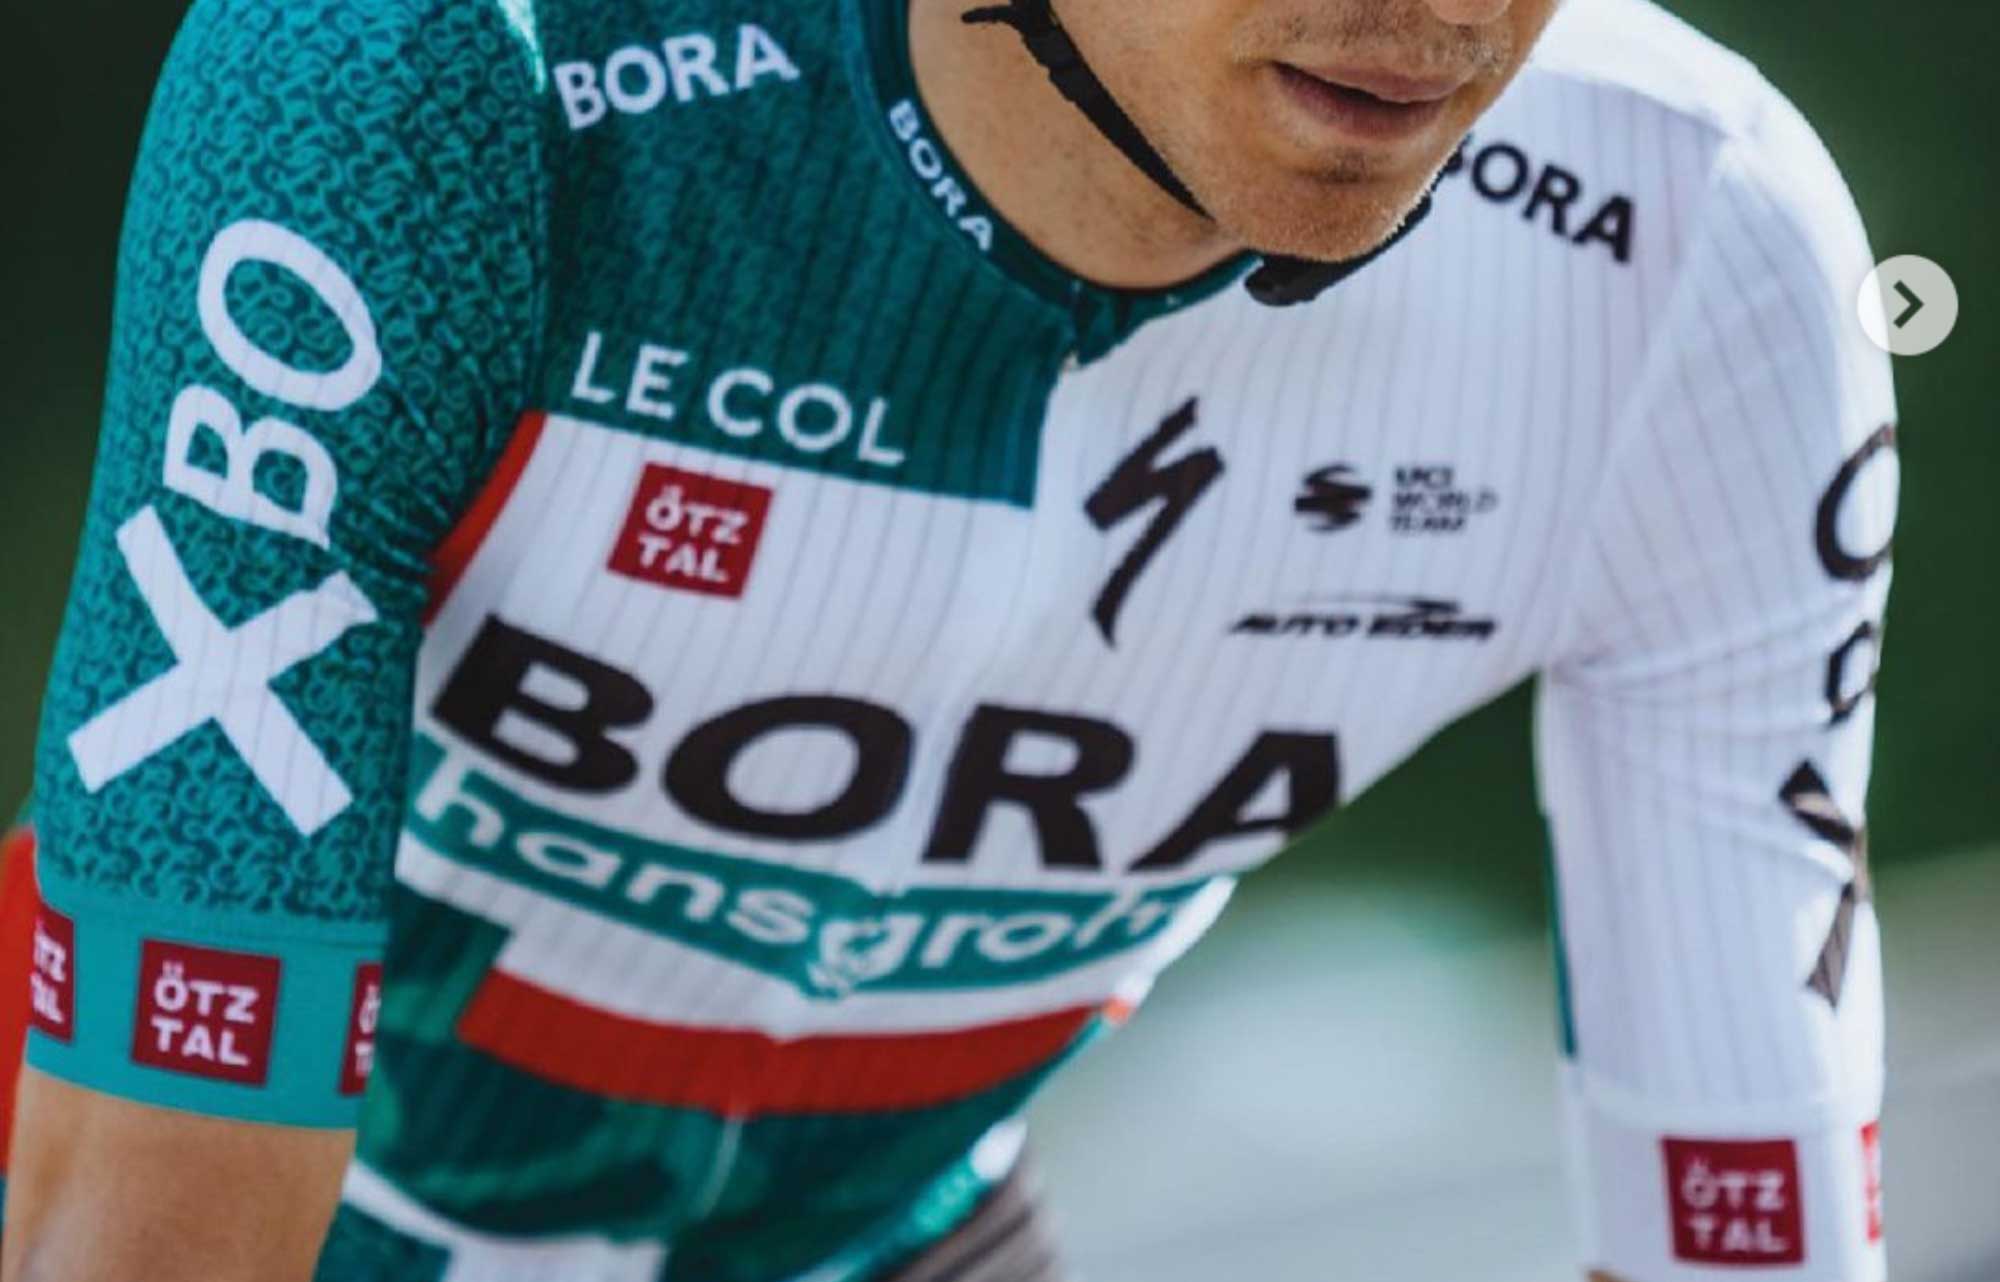 Le Col Bora-Hansgrohe Replica Jersey - Cycling Jersey Women's, Buy online